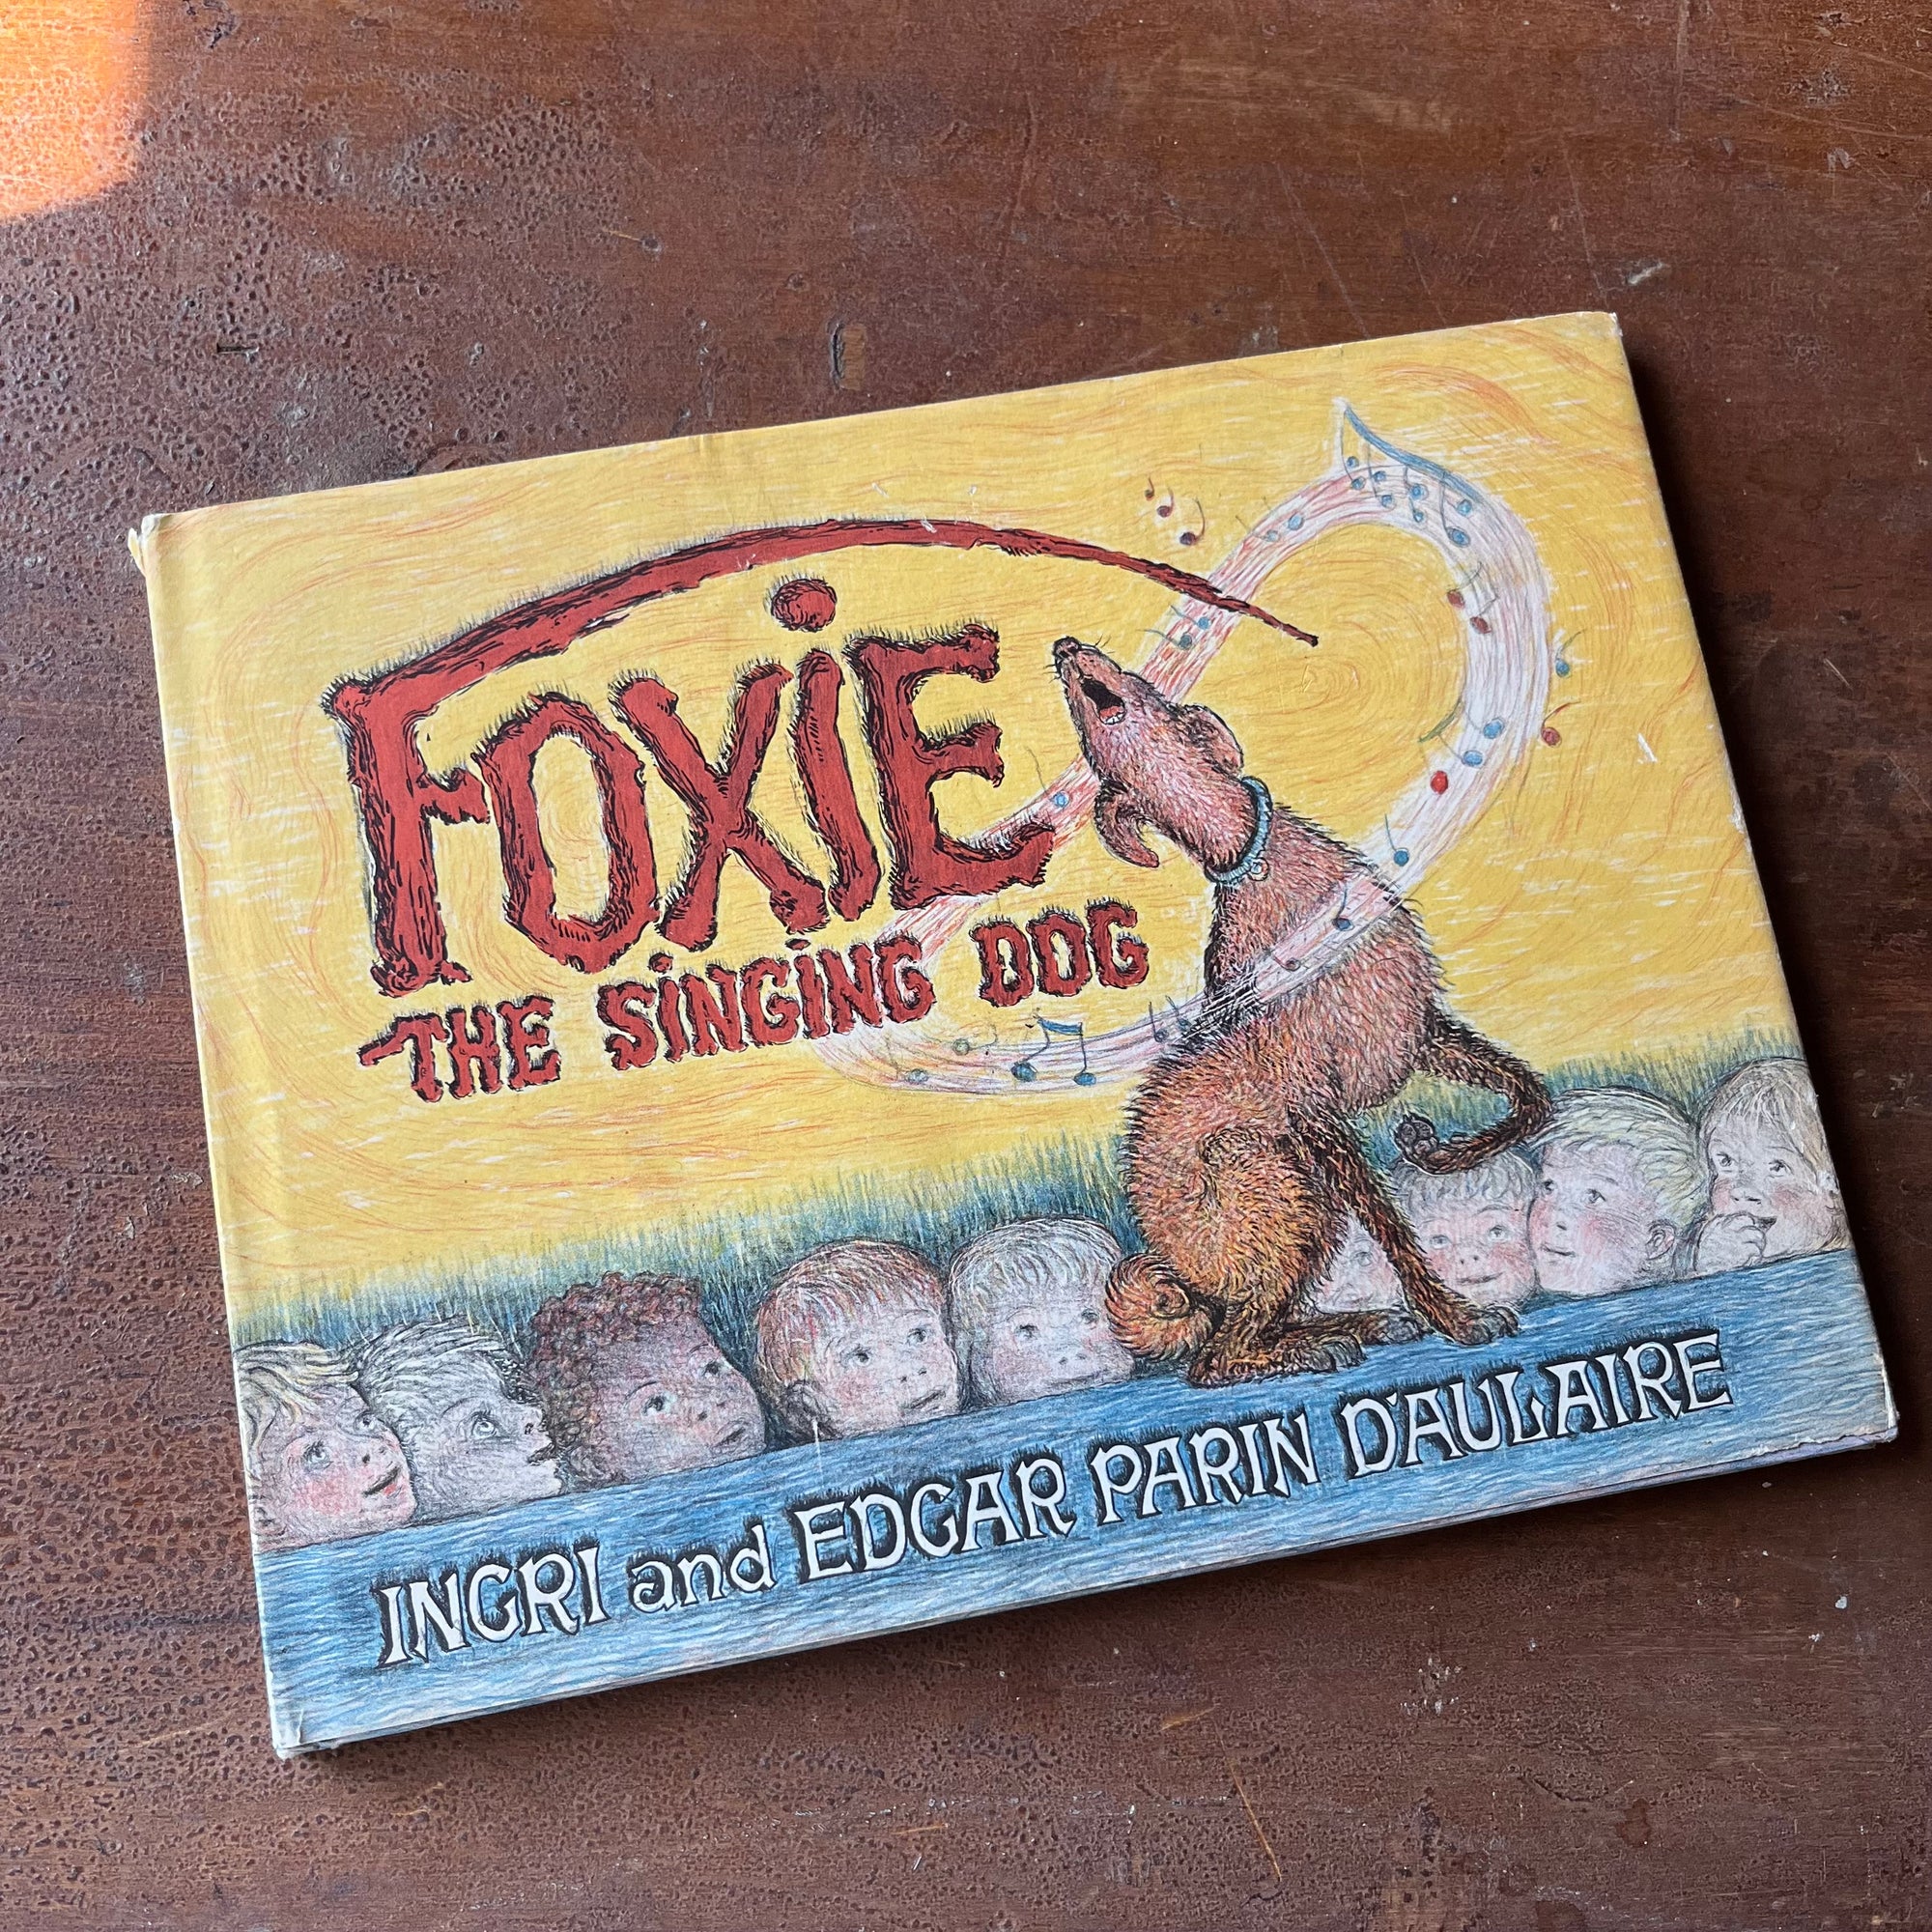 vintage children's picture book - Foxie the Singing Dog written and illustrated by Ingri and Edgar Parin D'Aulaire - a hard cover 1969 edition with dust jacket - view of the dust jacket's front cover with foxie the dog singing with a line of children watching him sing